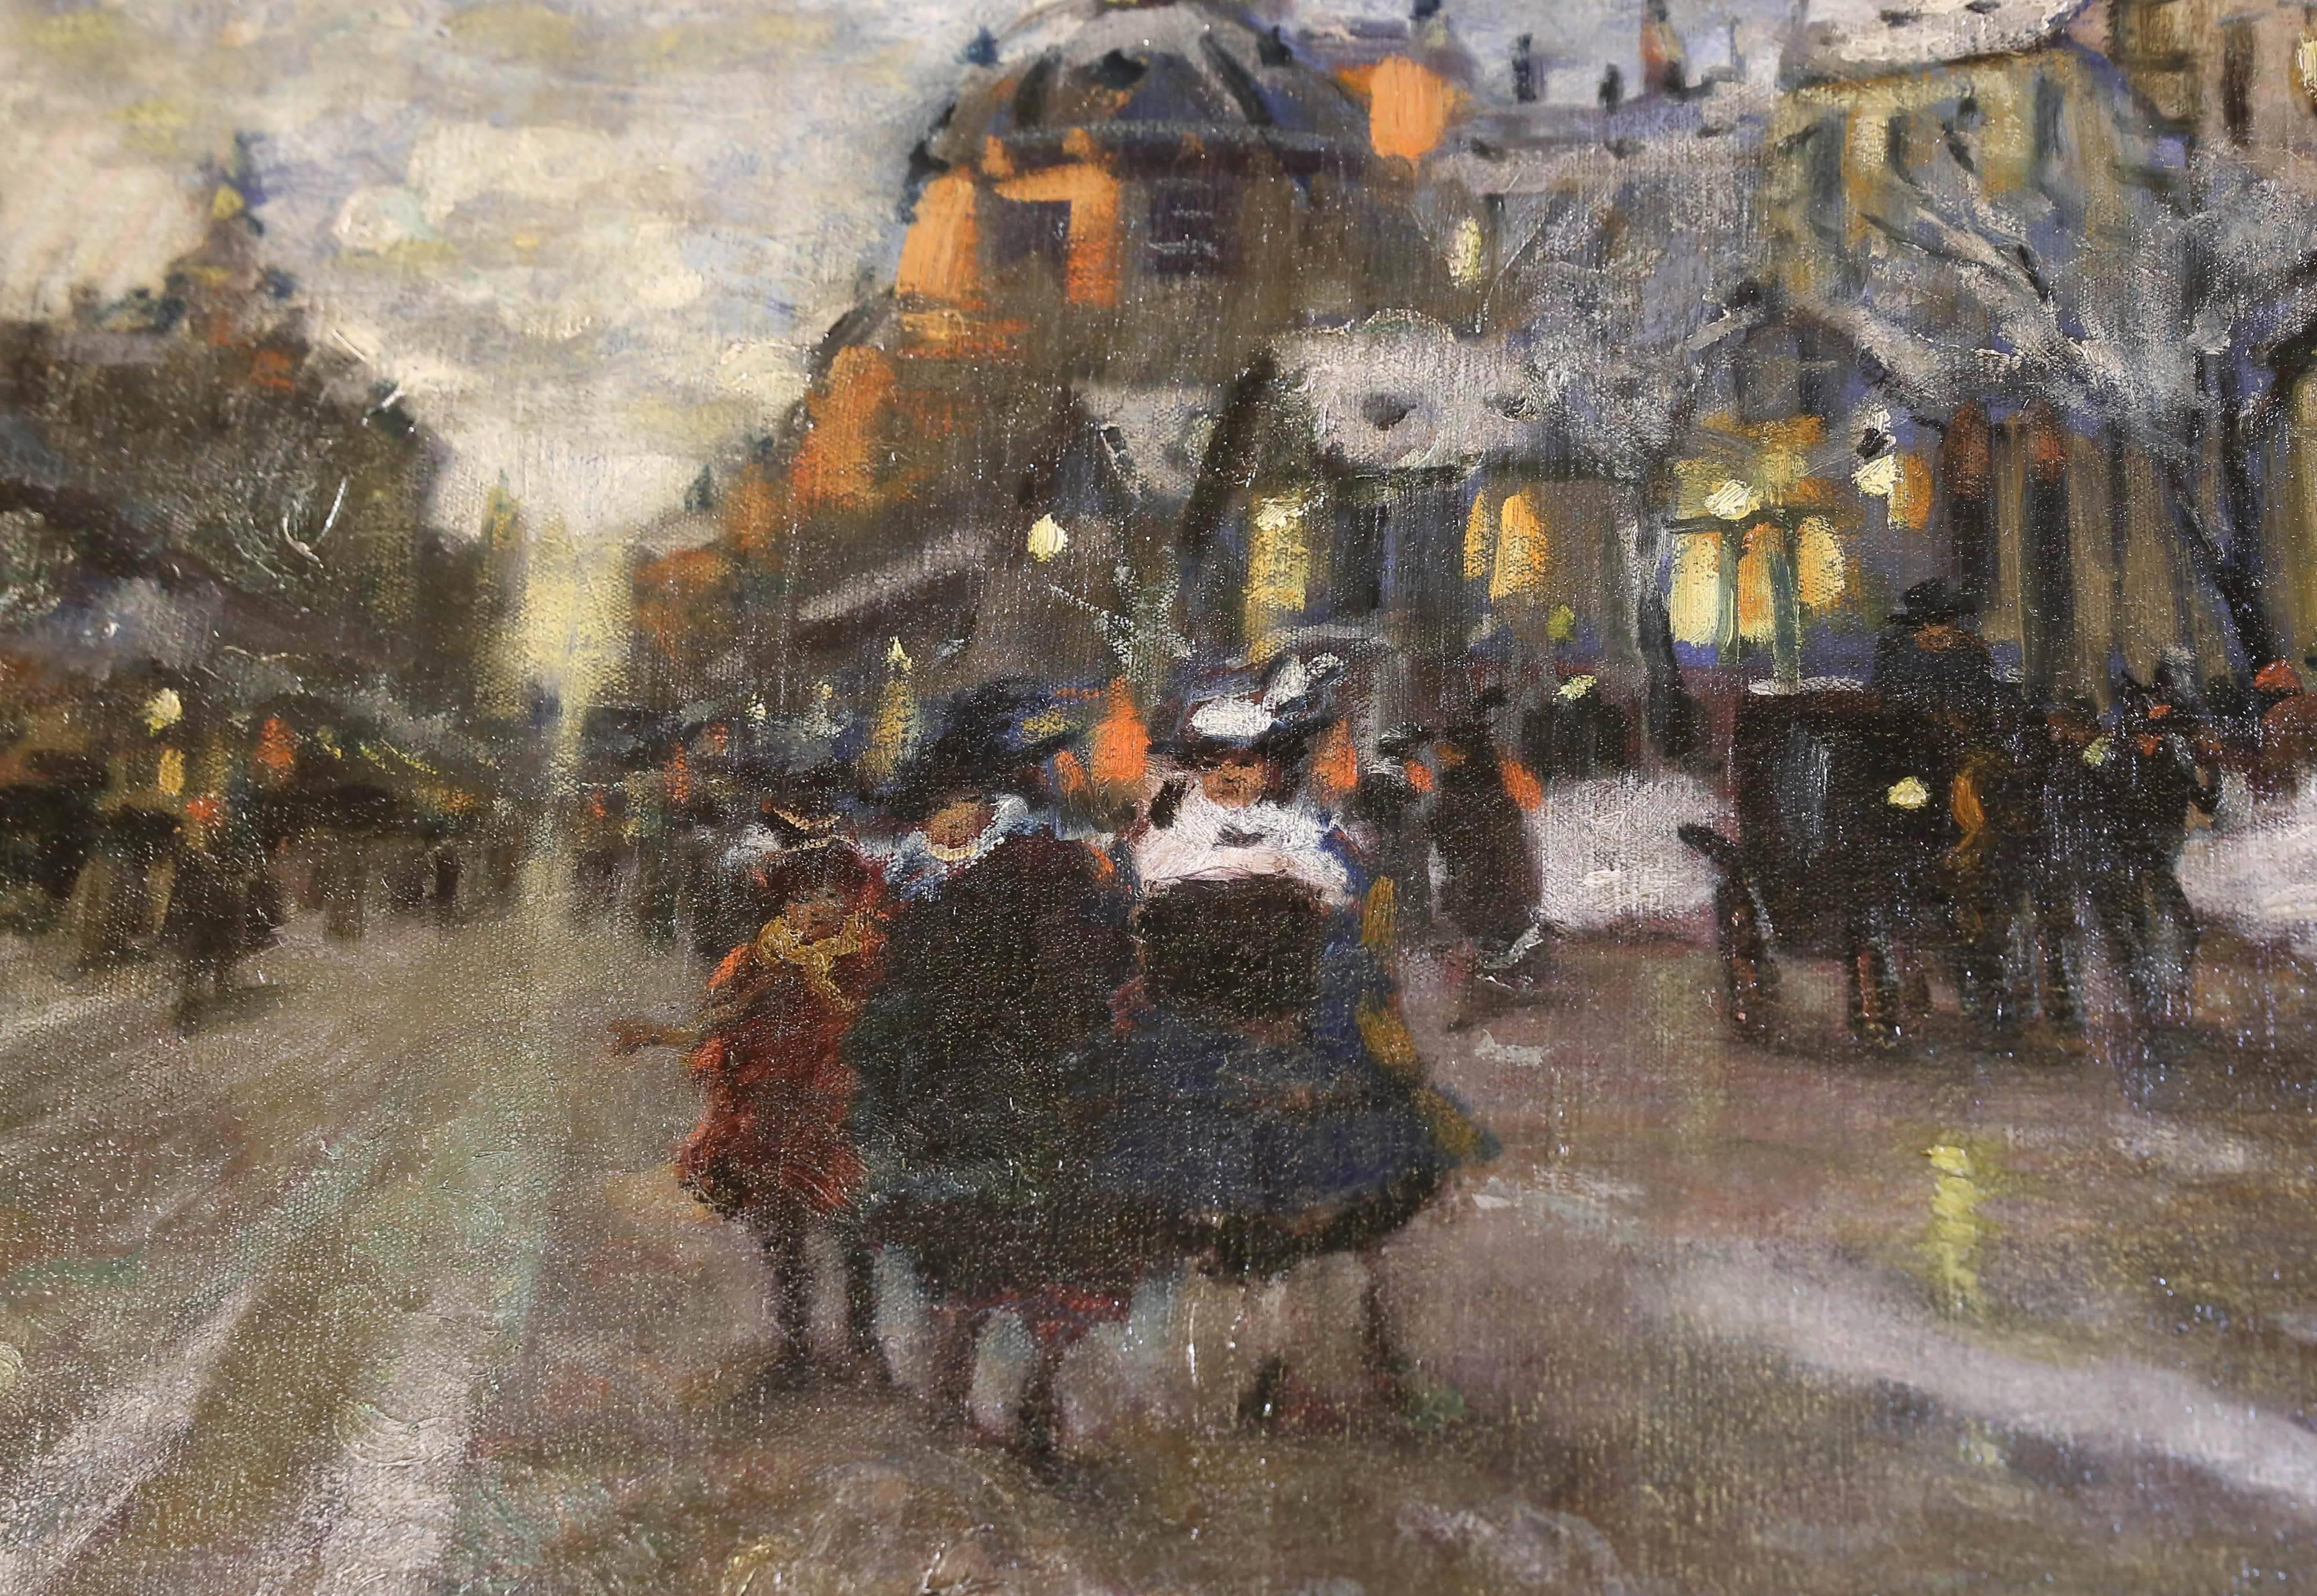 Munich street scene. Oil on canvas, circa 1930s.
Signed lower right.
Measures: 46" W x 28" H, overall size 60" W x 42" H.
Well listed Hungarian artist. Active: Paris, Budapest, Munich, Vienna. Berkes studied at The Academy of